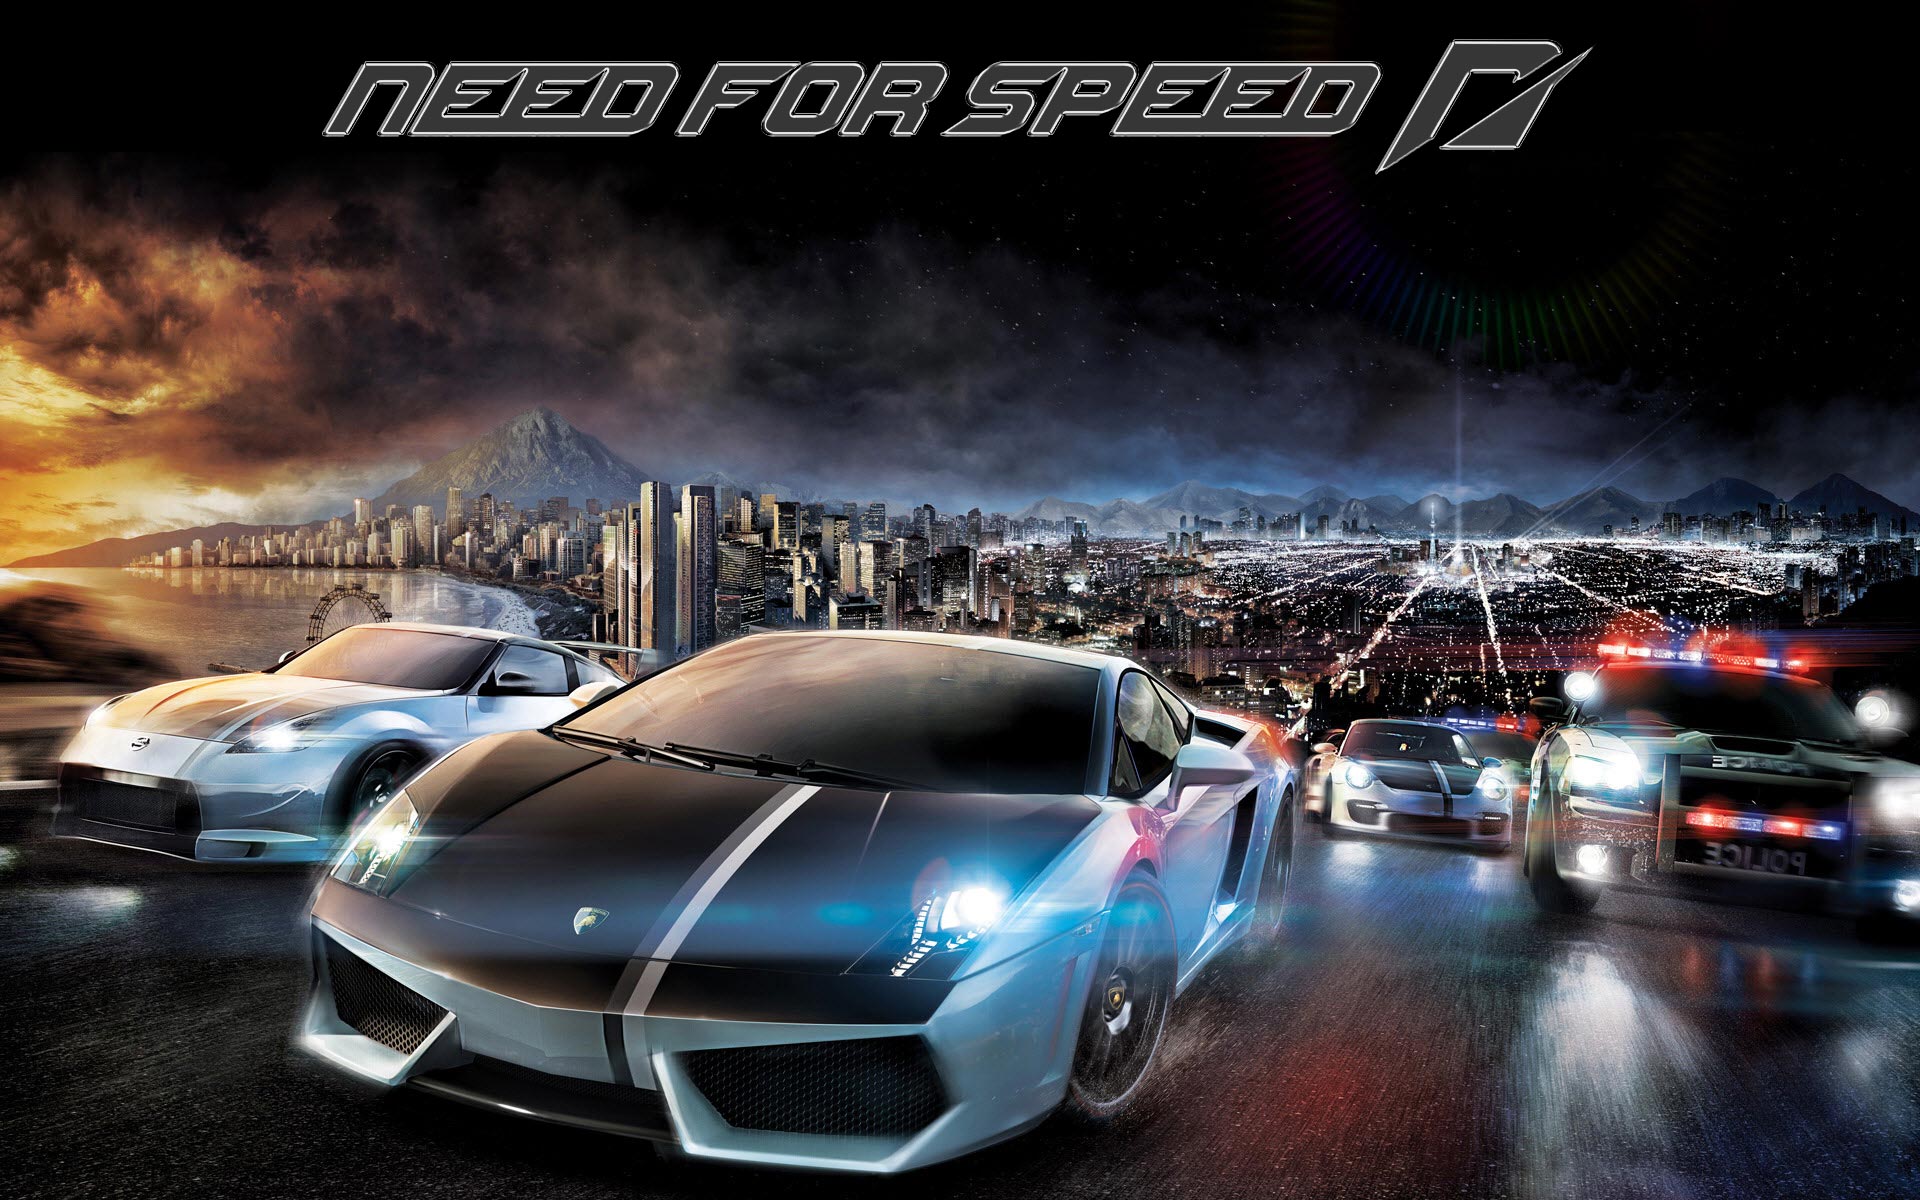 Need for Speed (2014) - Wallpaper, High Definition, High Quality